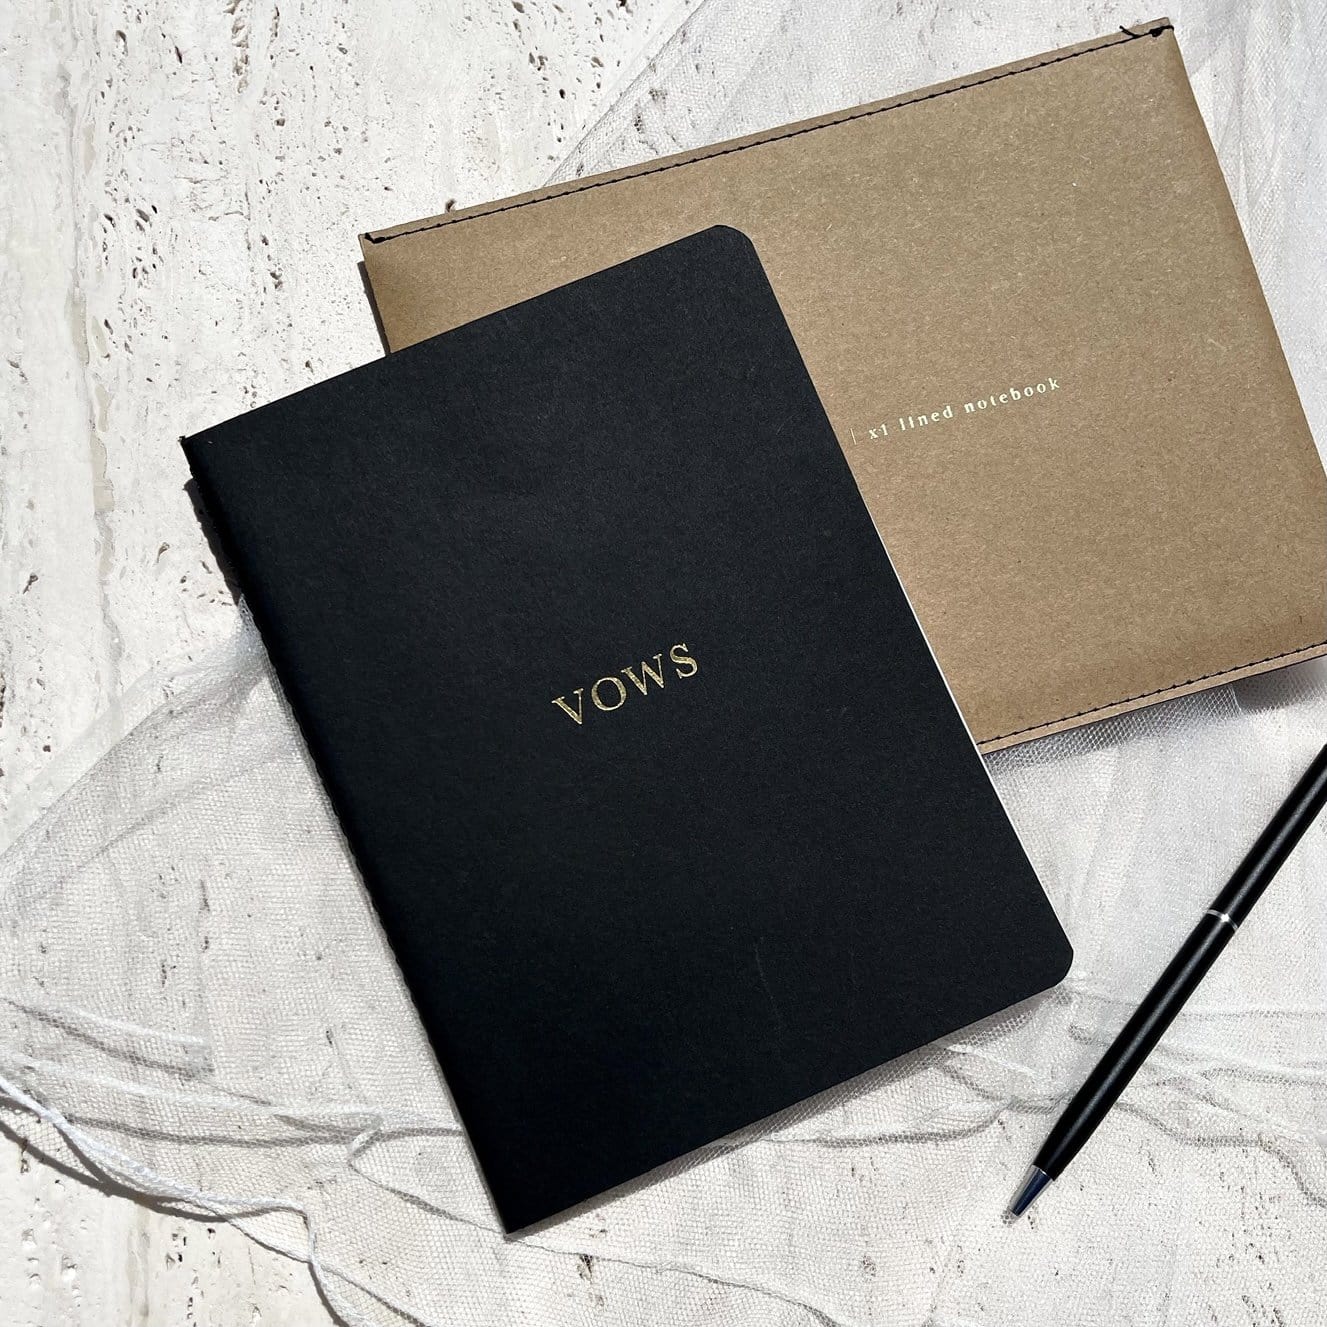 Vows notebook by An organised life